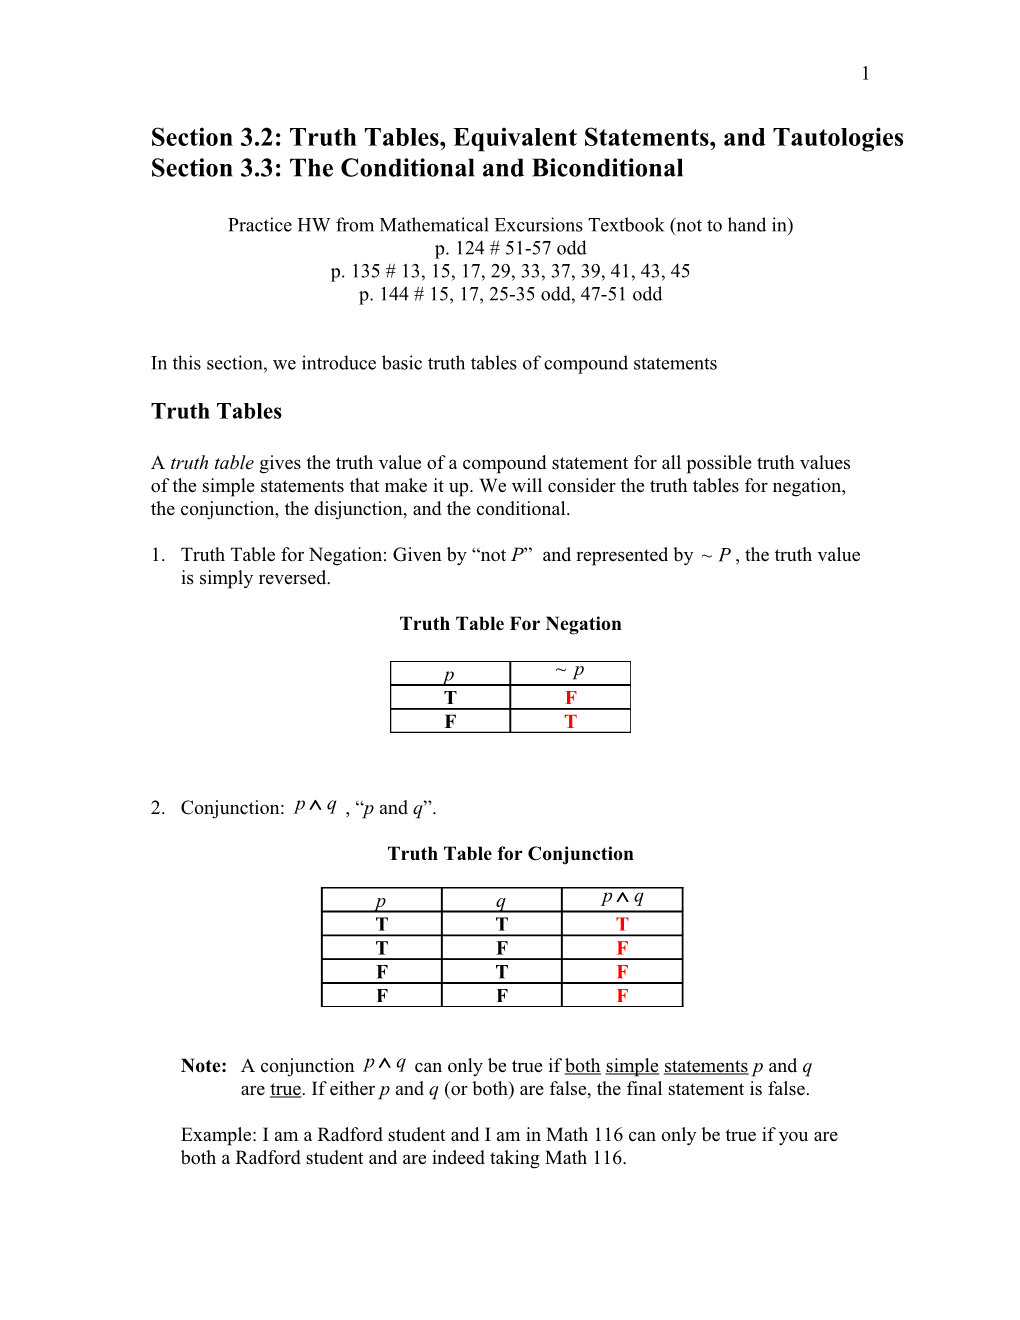 Section 3.2: Truth Tables, Equivalent Statements, and Tautologies